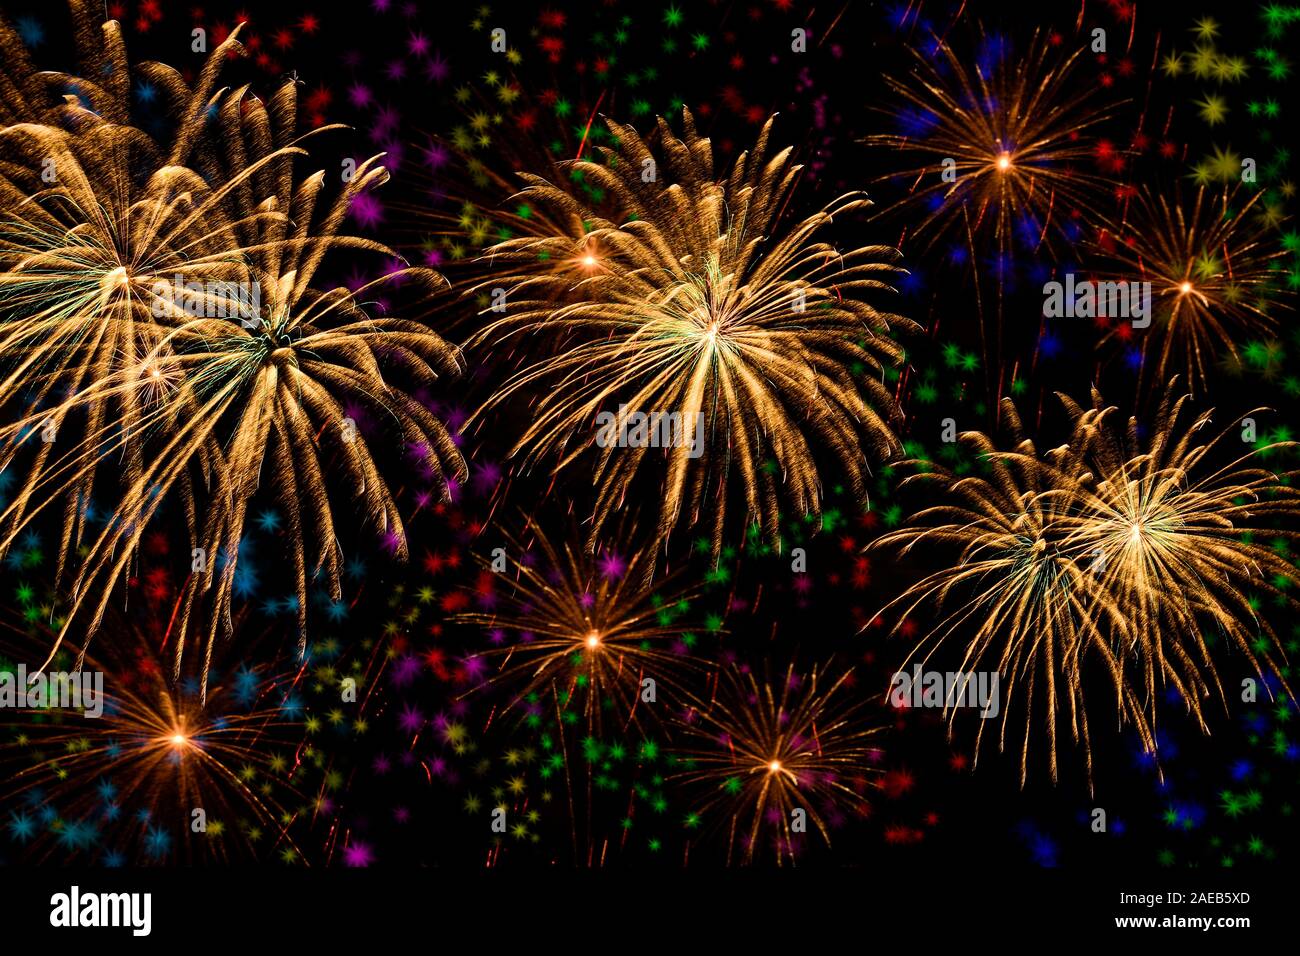 Gold fireworks celebration on colorful star background and the midnight sky background. Stock Photo